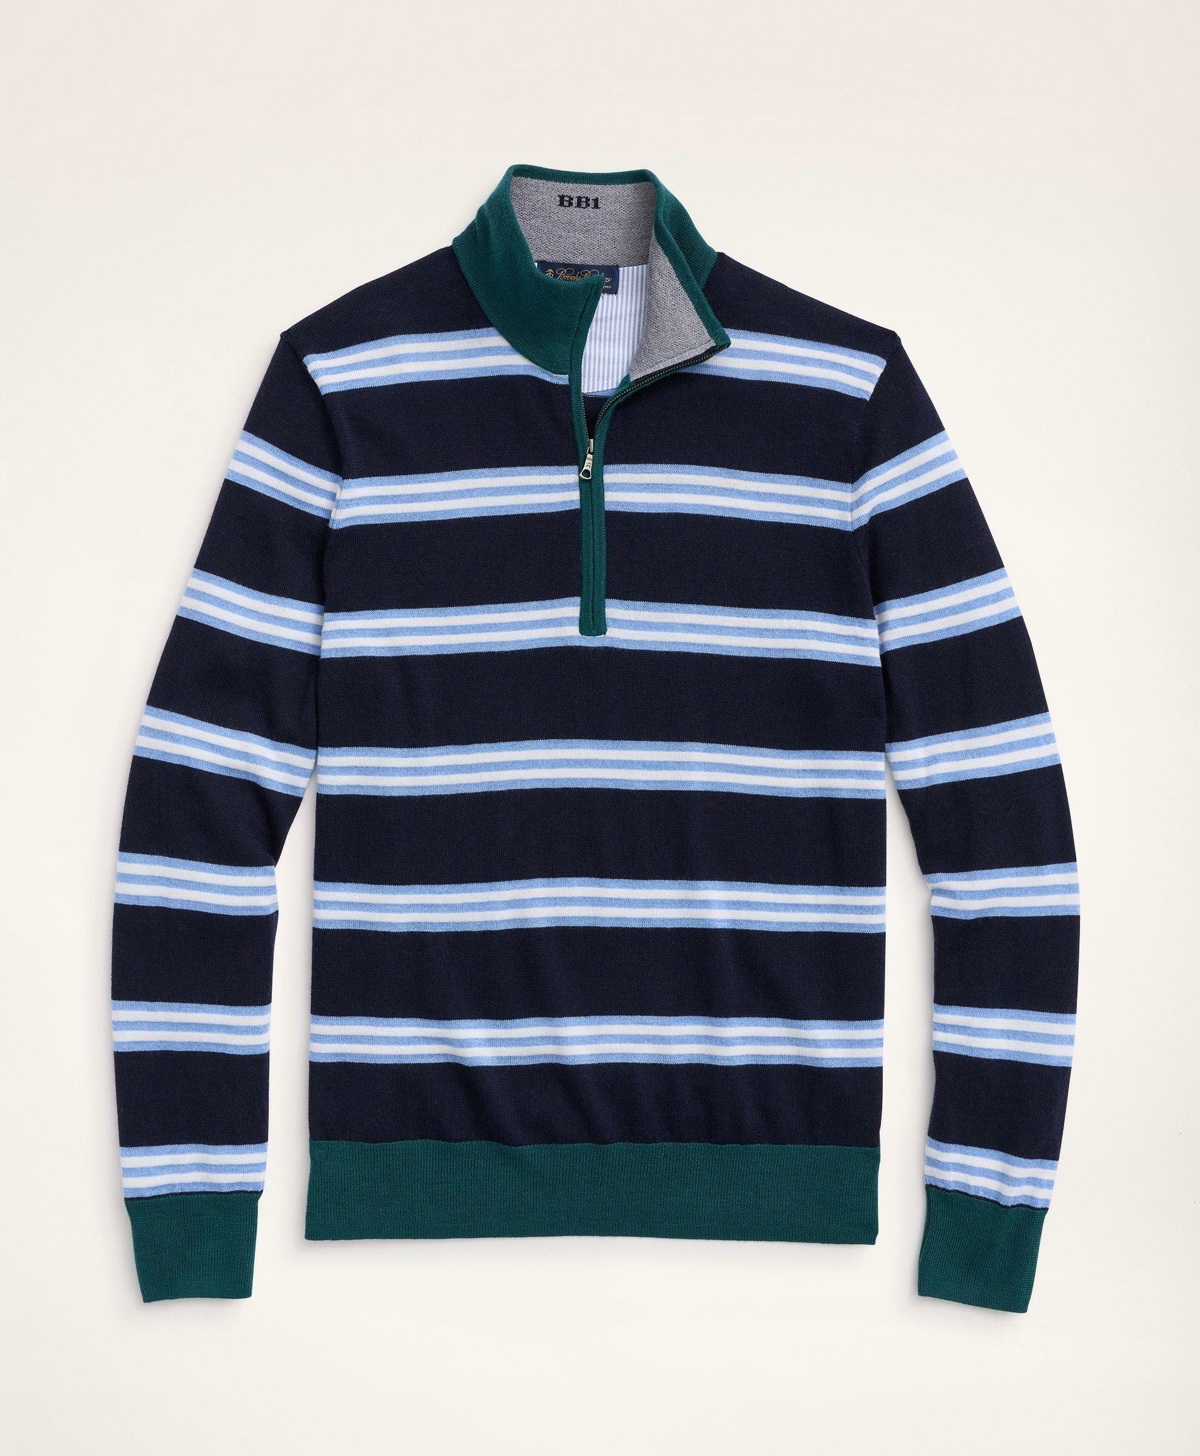 Brooks Brothers Men's Supima Cotton Intarsia Rower Crewneck Sweater | Navy | Size 2XL - Shop Holiday Gifts and Styles